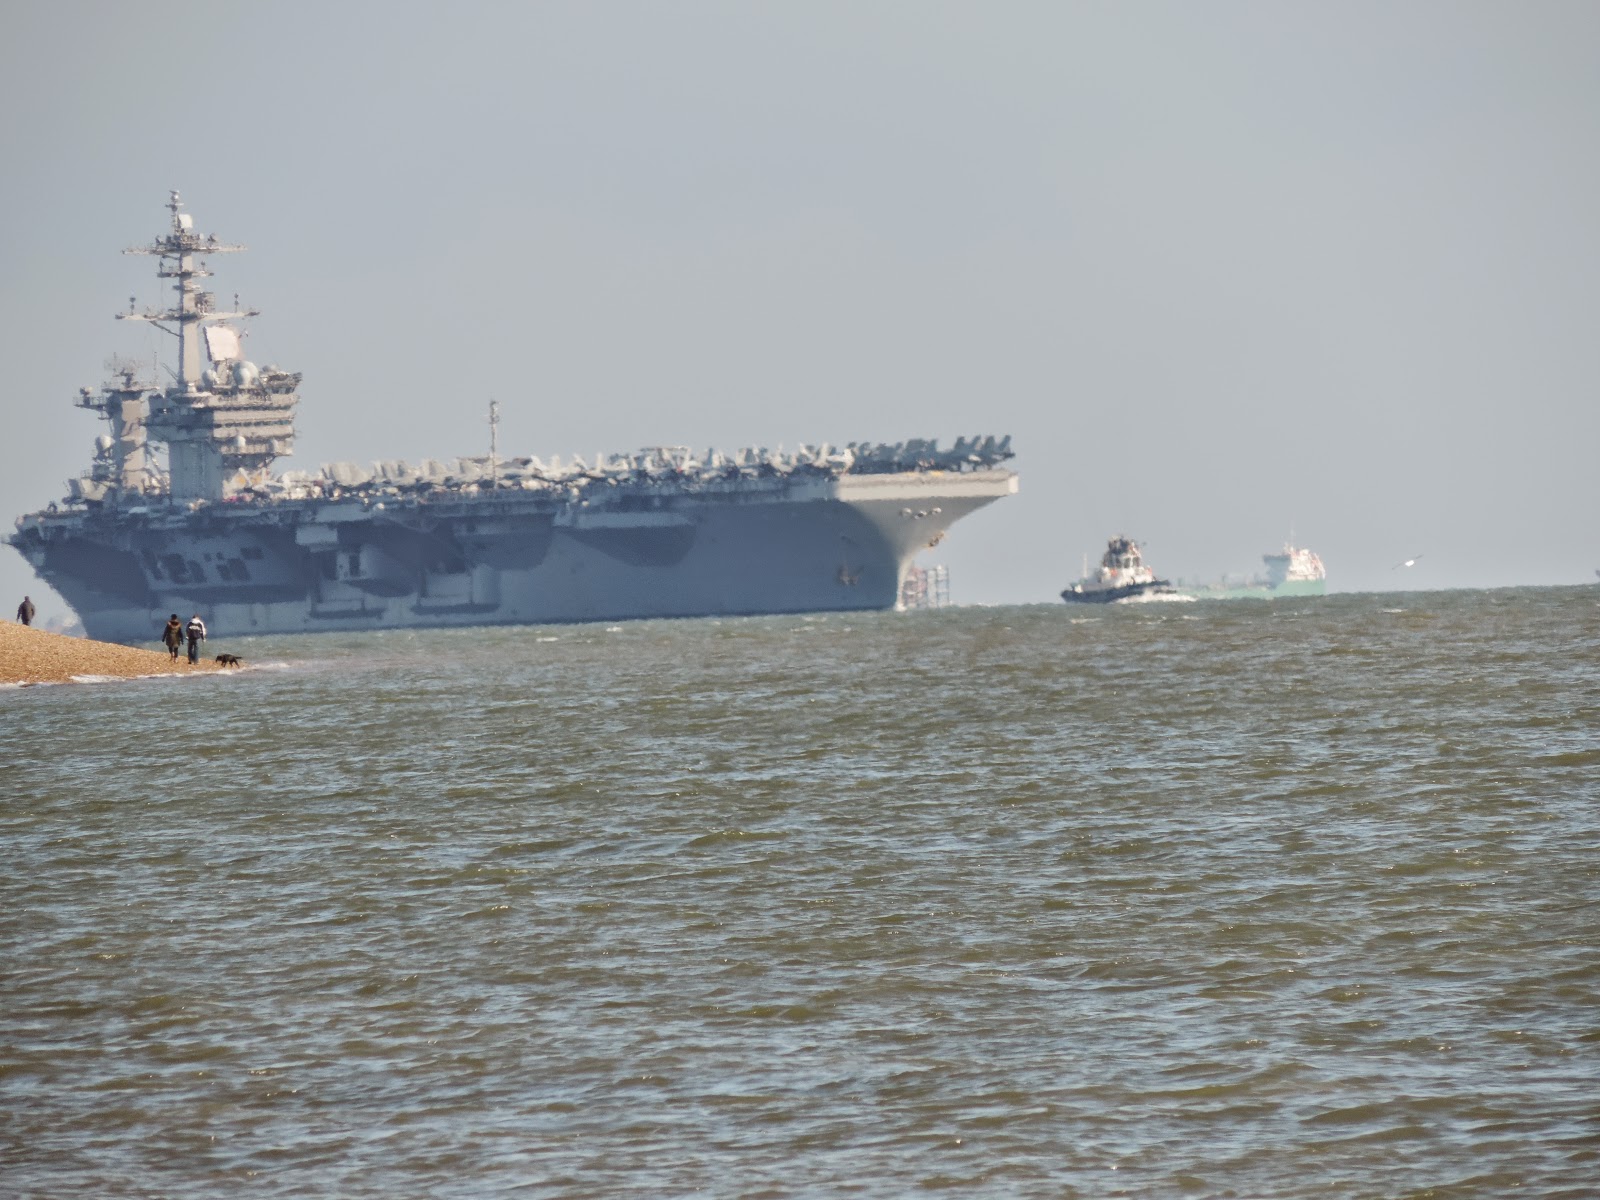 american aircraft carrier visits stokes bay on world tour